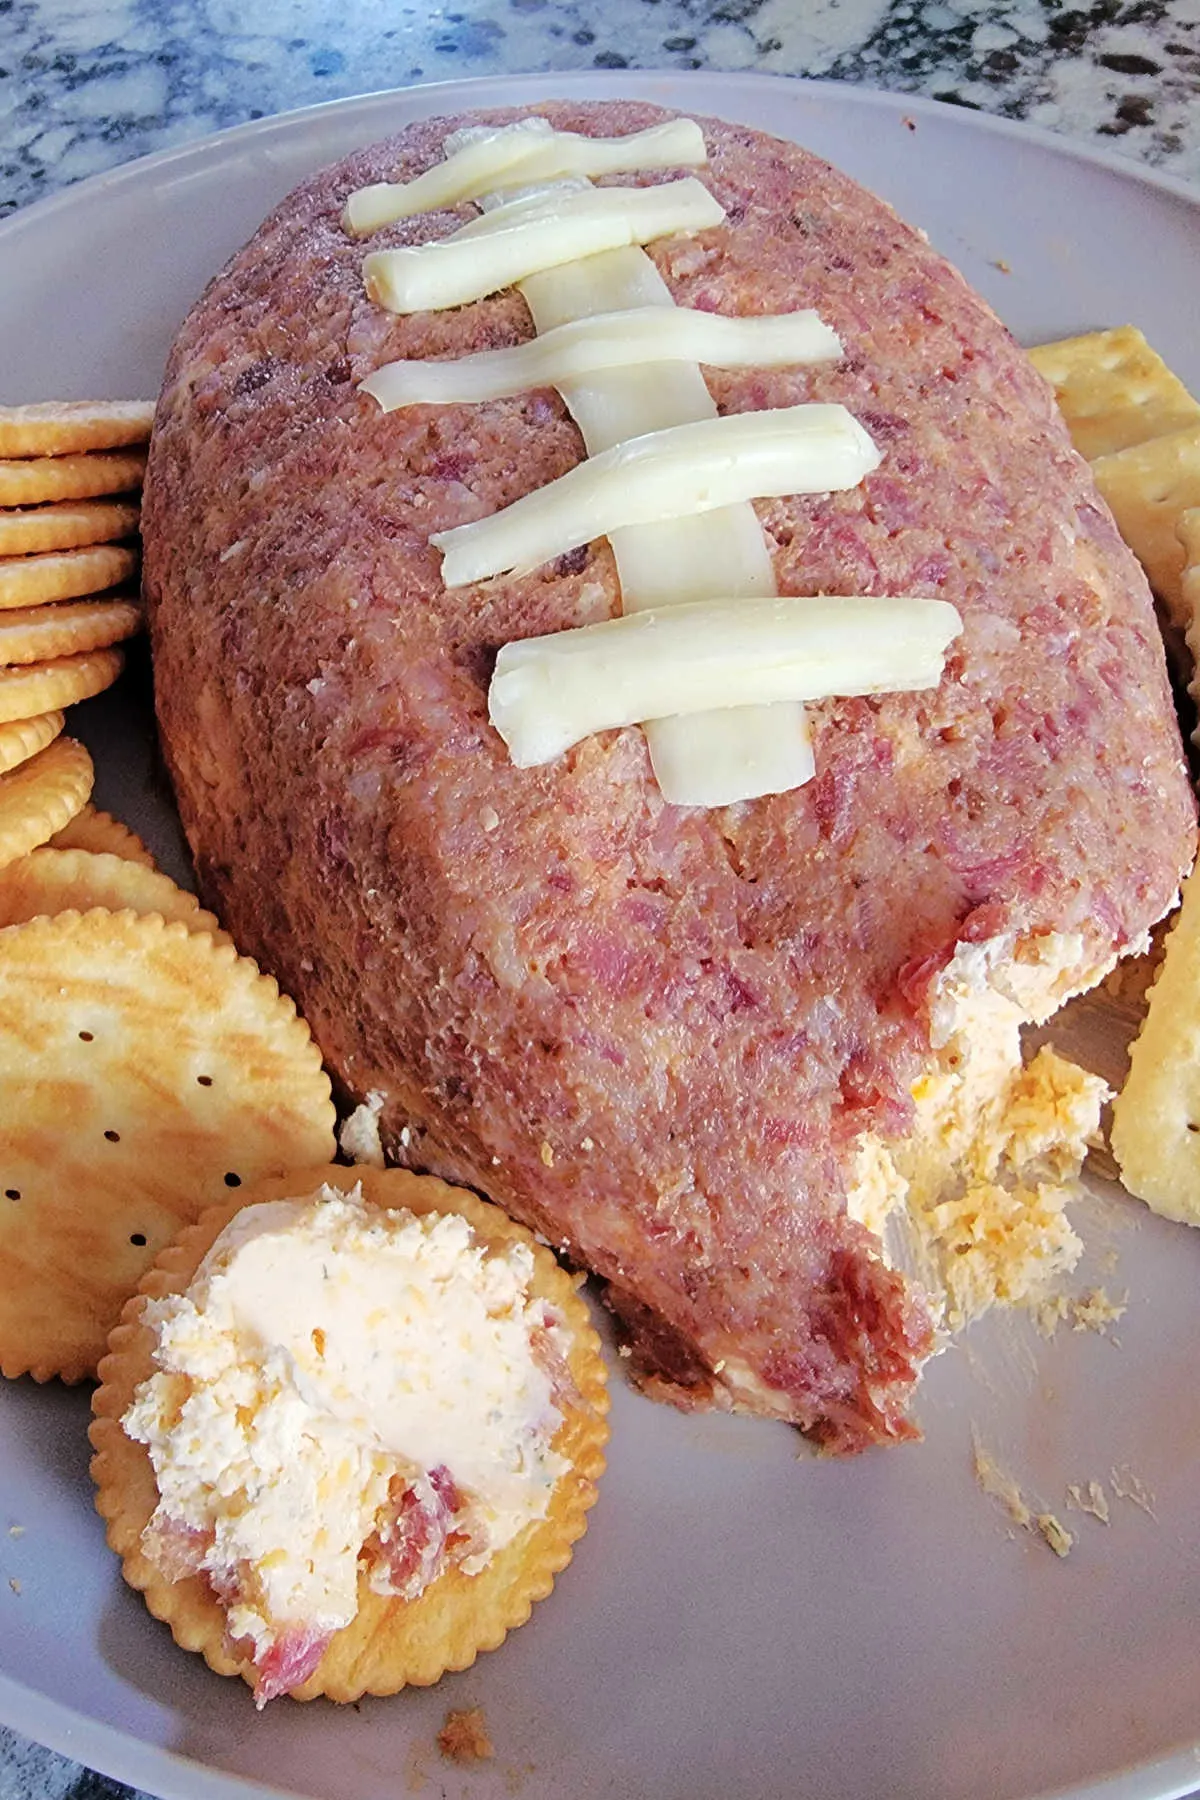 Football shaped cheese ball coated in ground up bacon with string cheese laces.